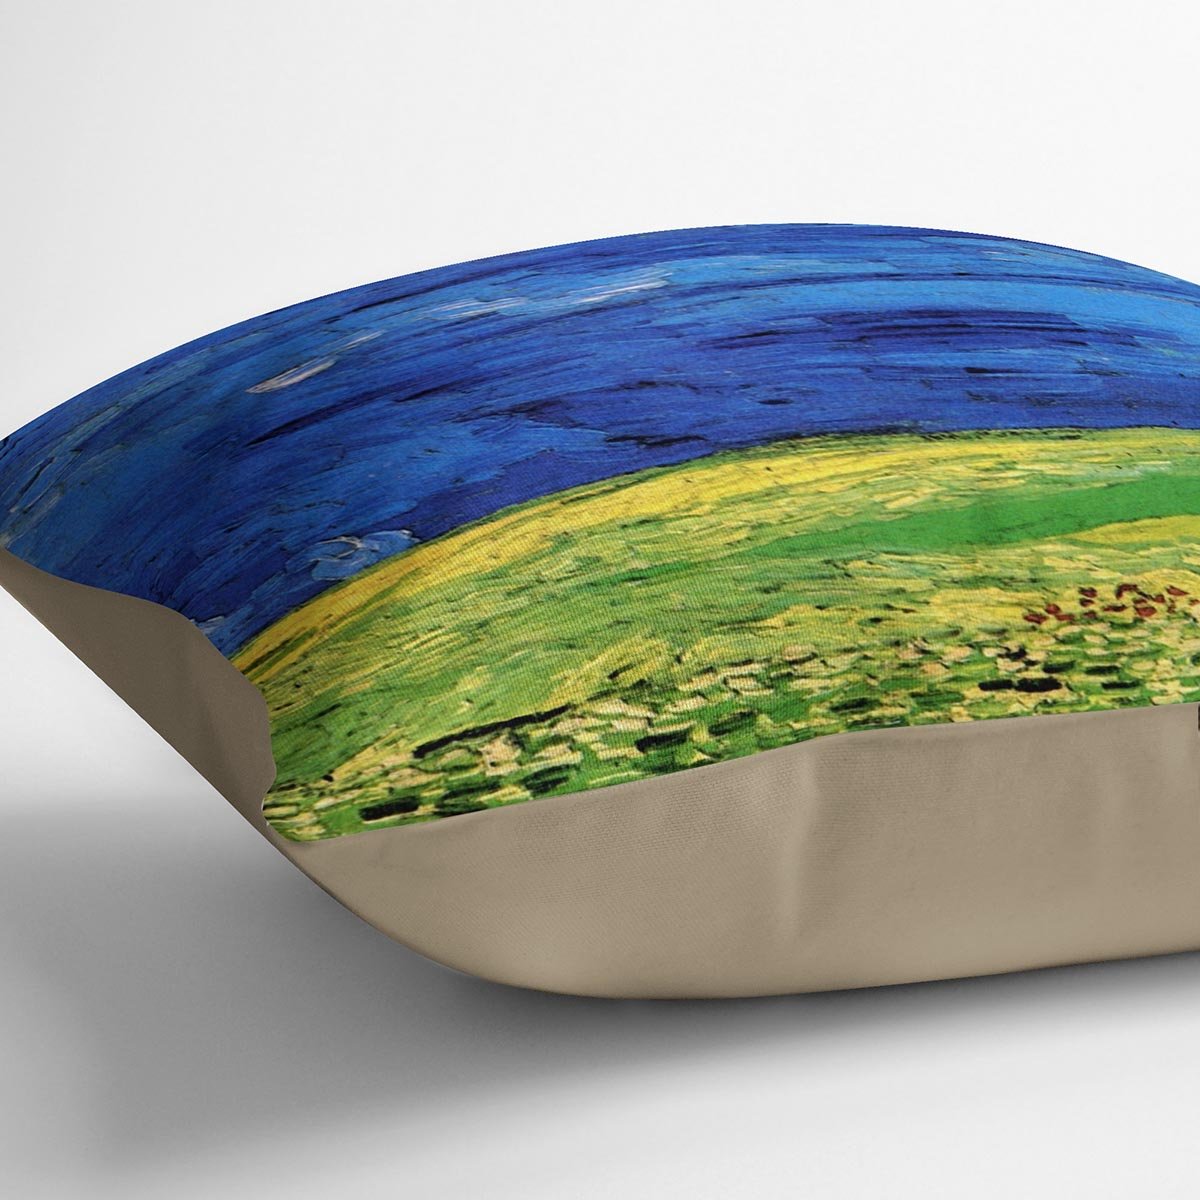 Wheat Field Under Clouded Sky by Van Gogh Throw Pillow